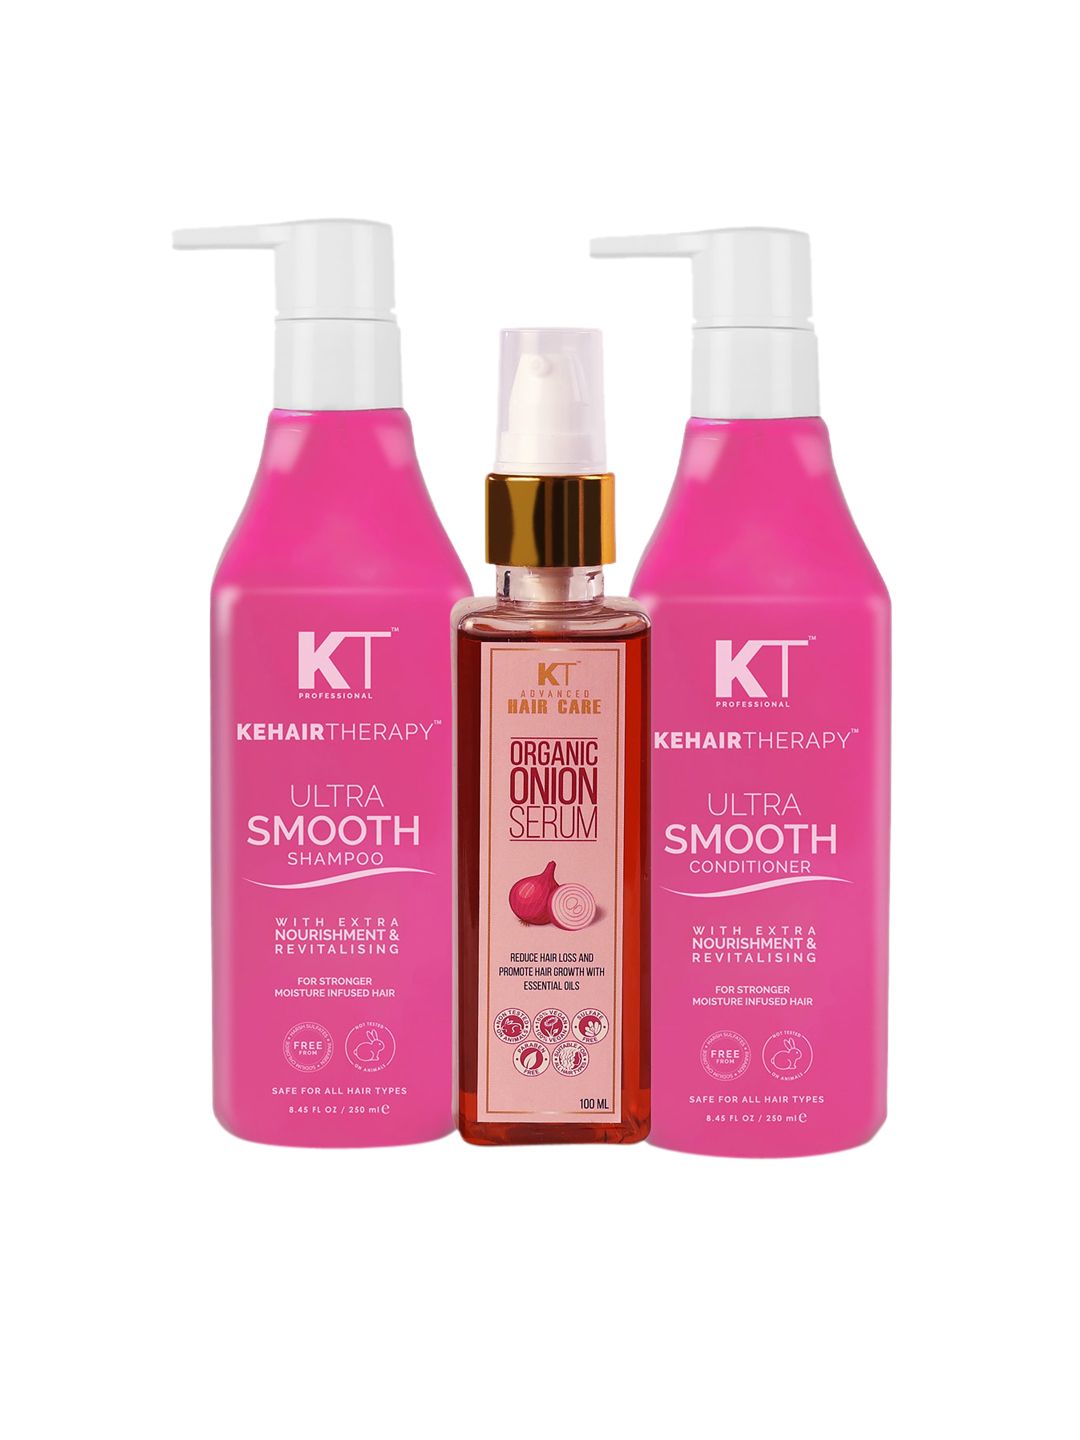 KEHAIRTHERAPY 3-Pieces Shampoo & Conditioner with Serum Hair Care Kit Price in India